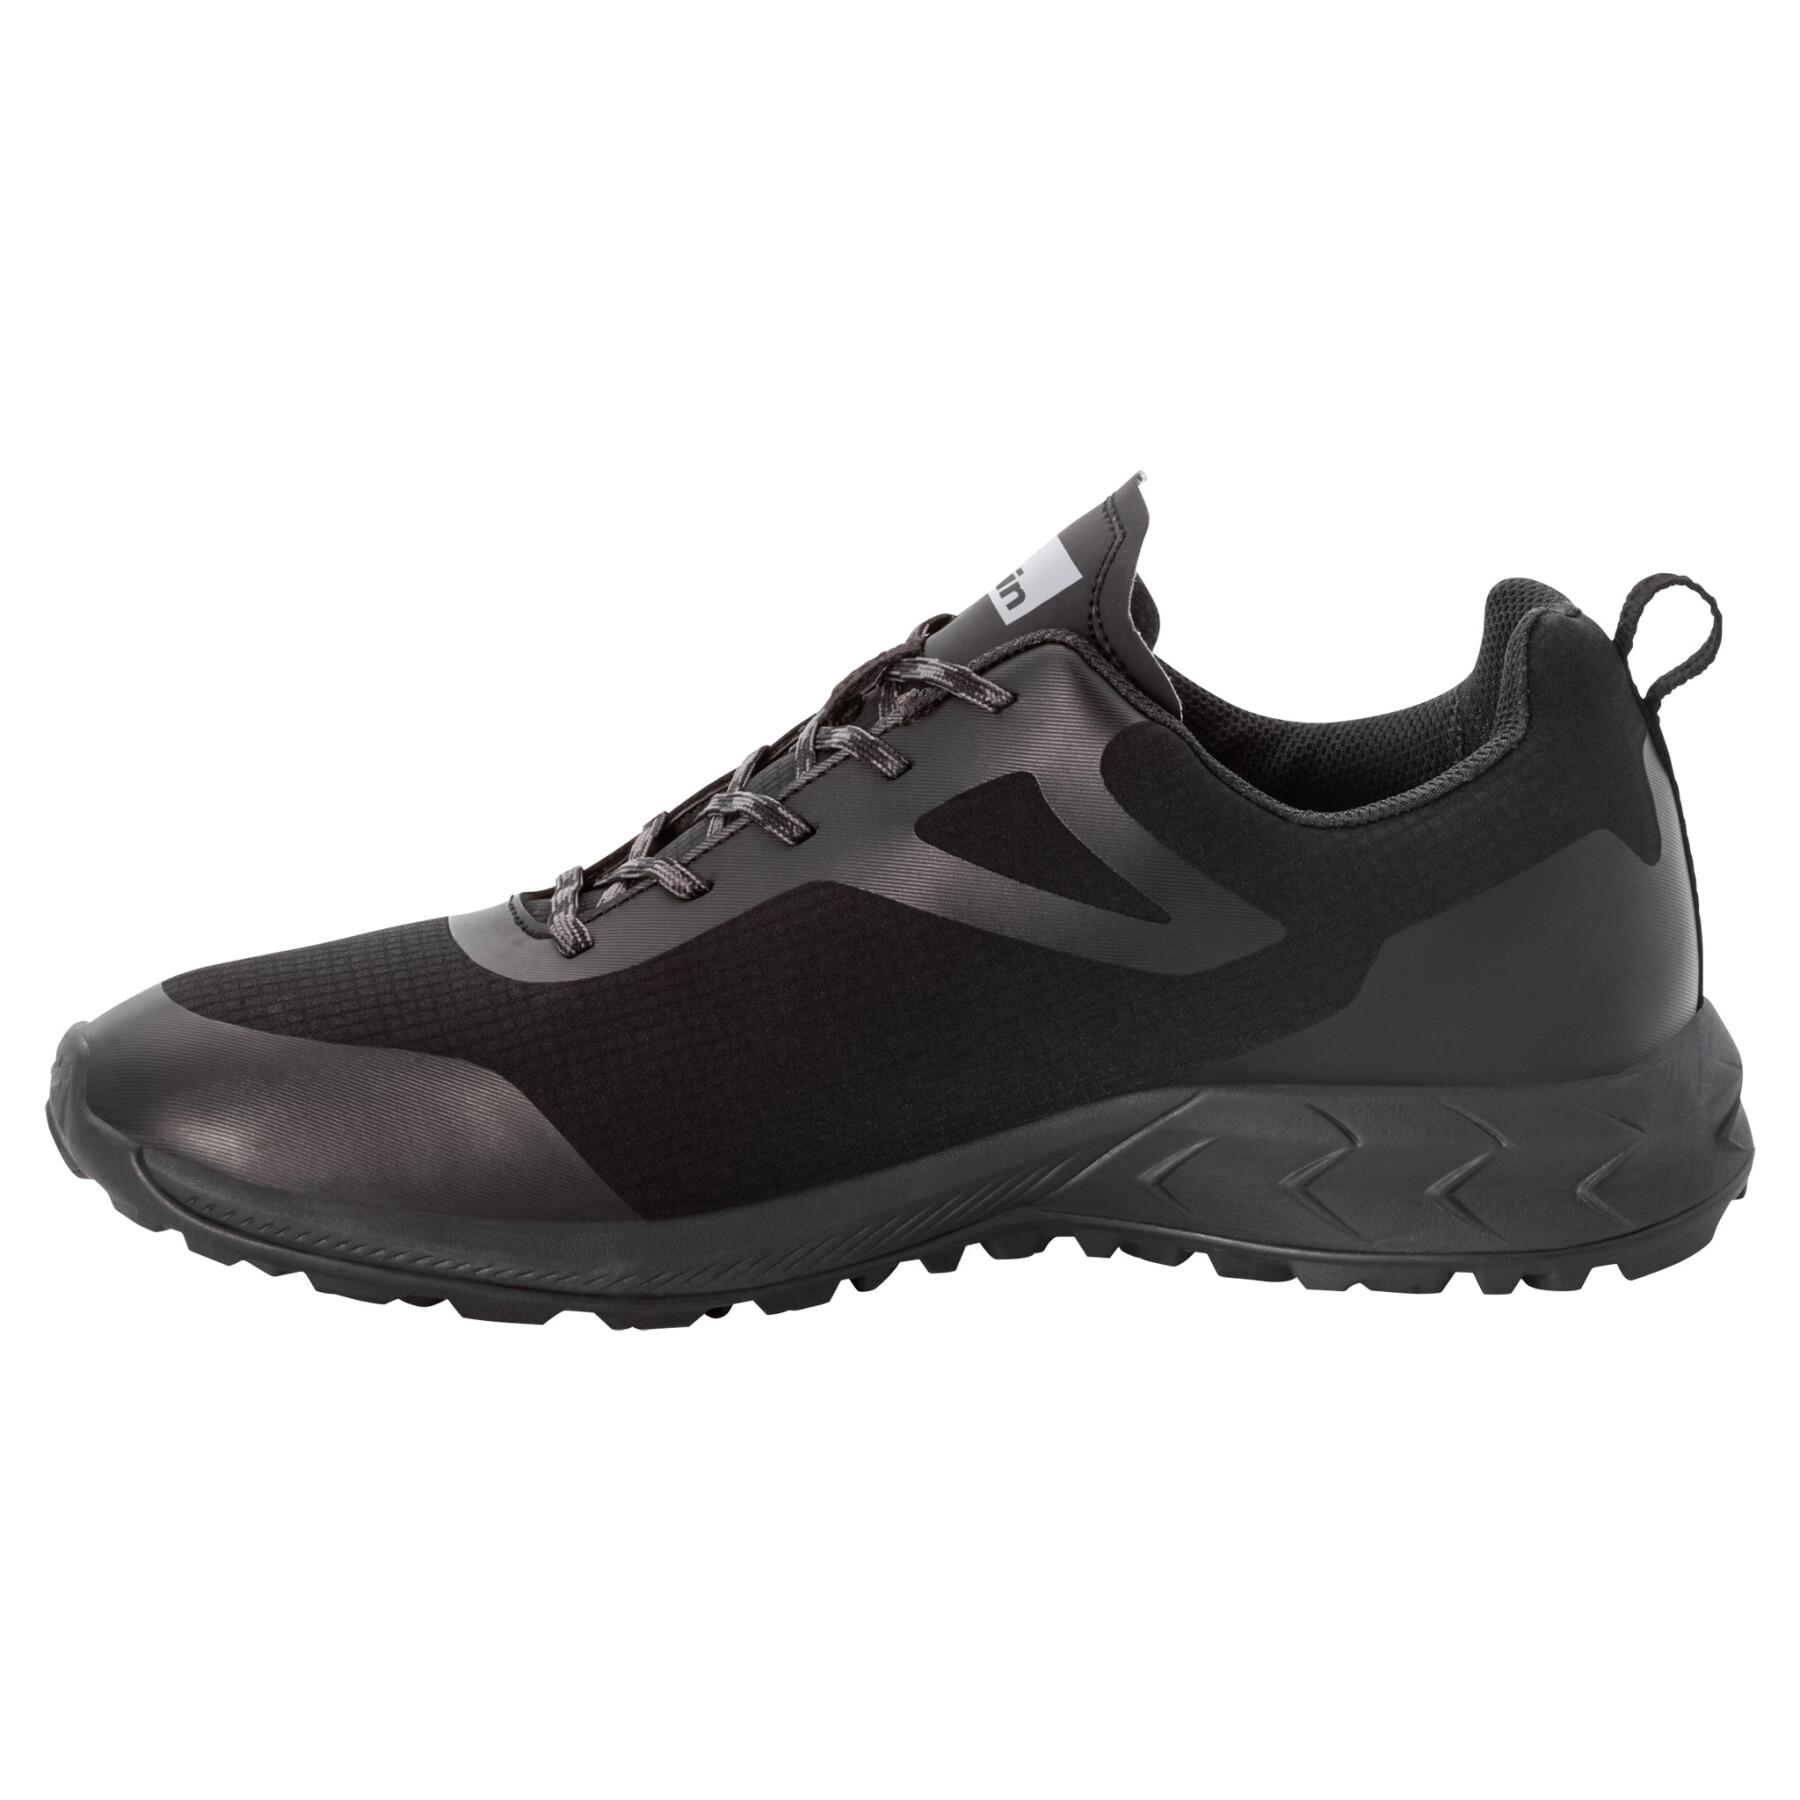 Walking shoes Jack Wolfskin Woodland Shell Texapore Low